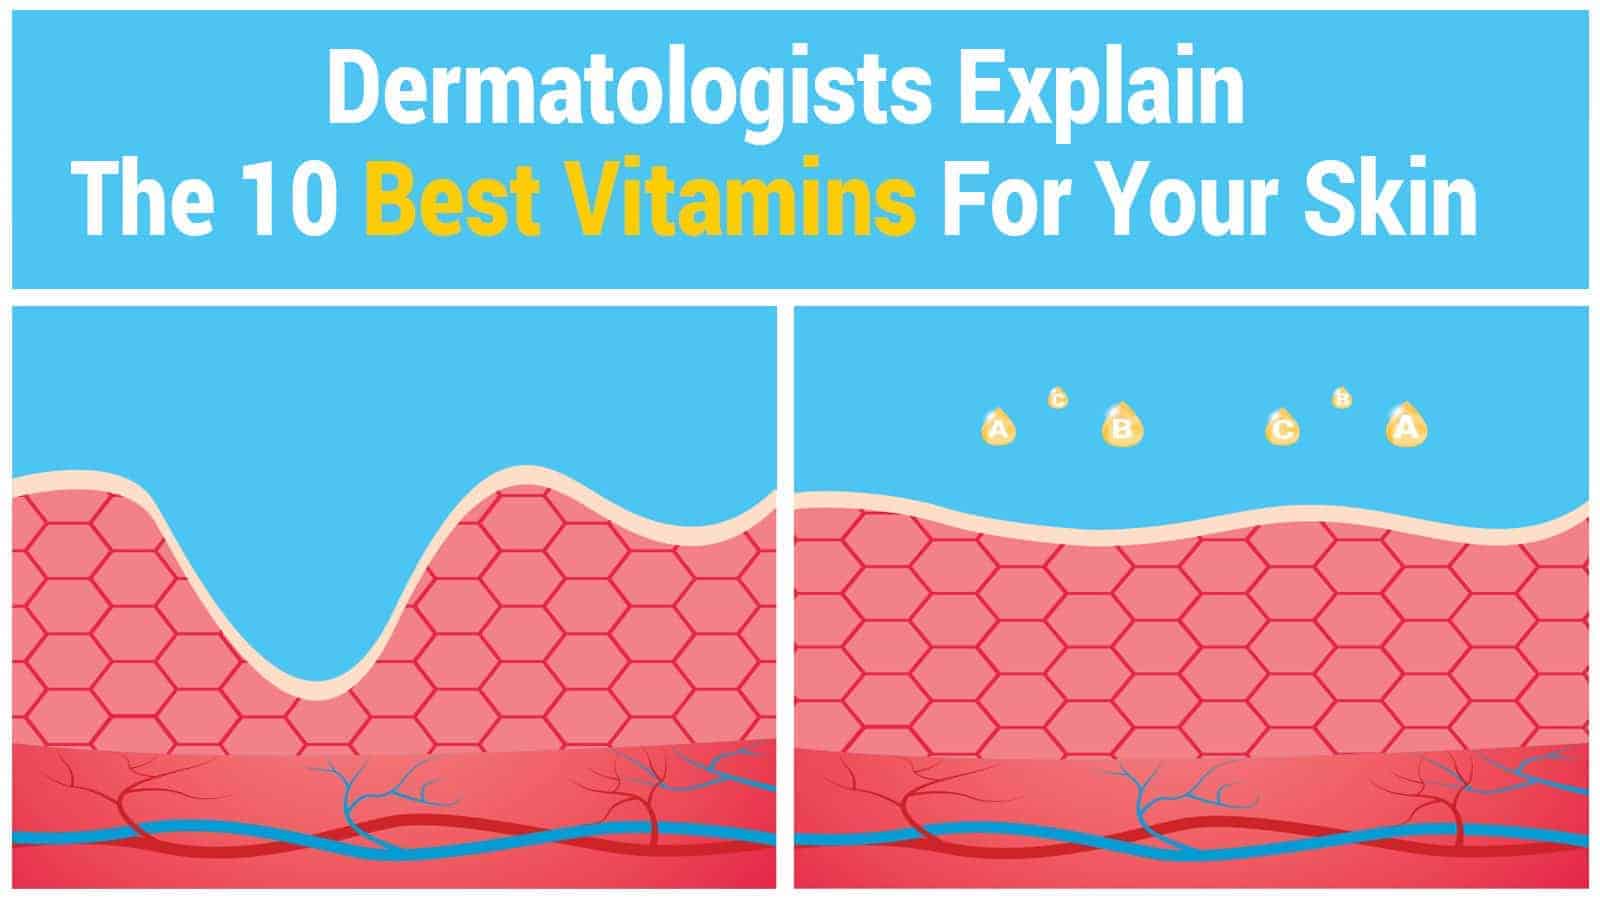 Dermatologists Explain The 10 Best Vitamins For Your Skin